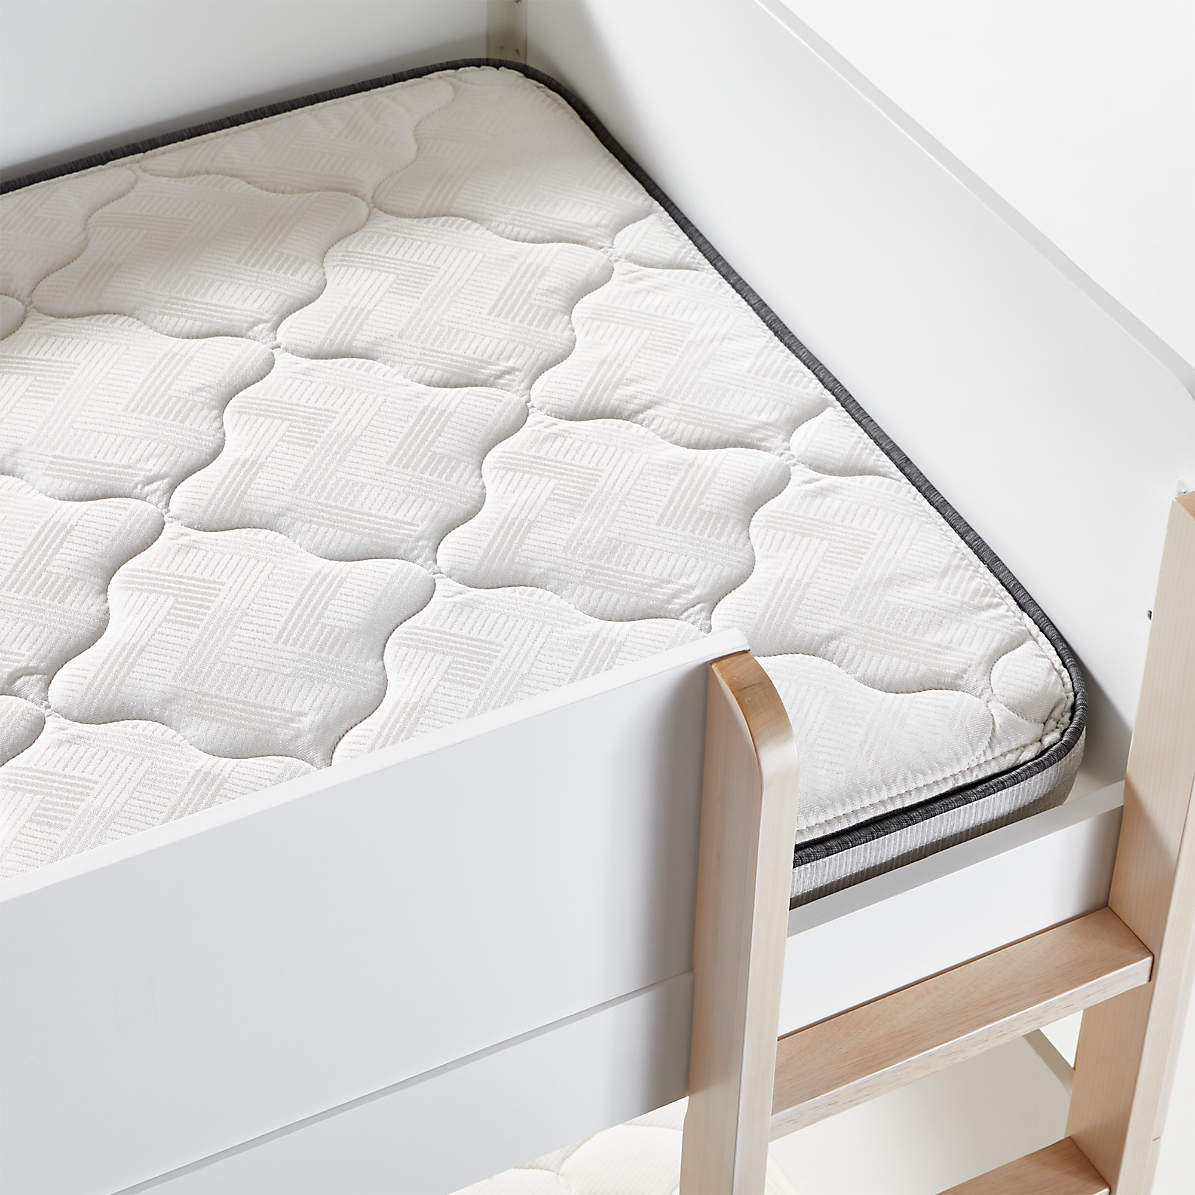 Simmons Beautyrest Foam Twin Bunk, What Size Mattress For A Twin Bunk Bed